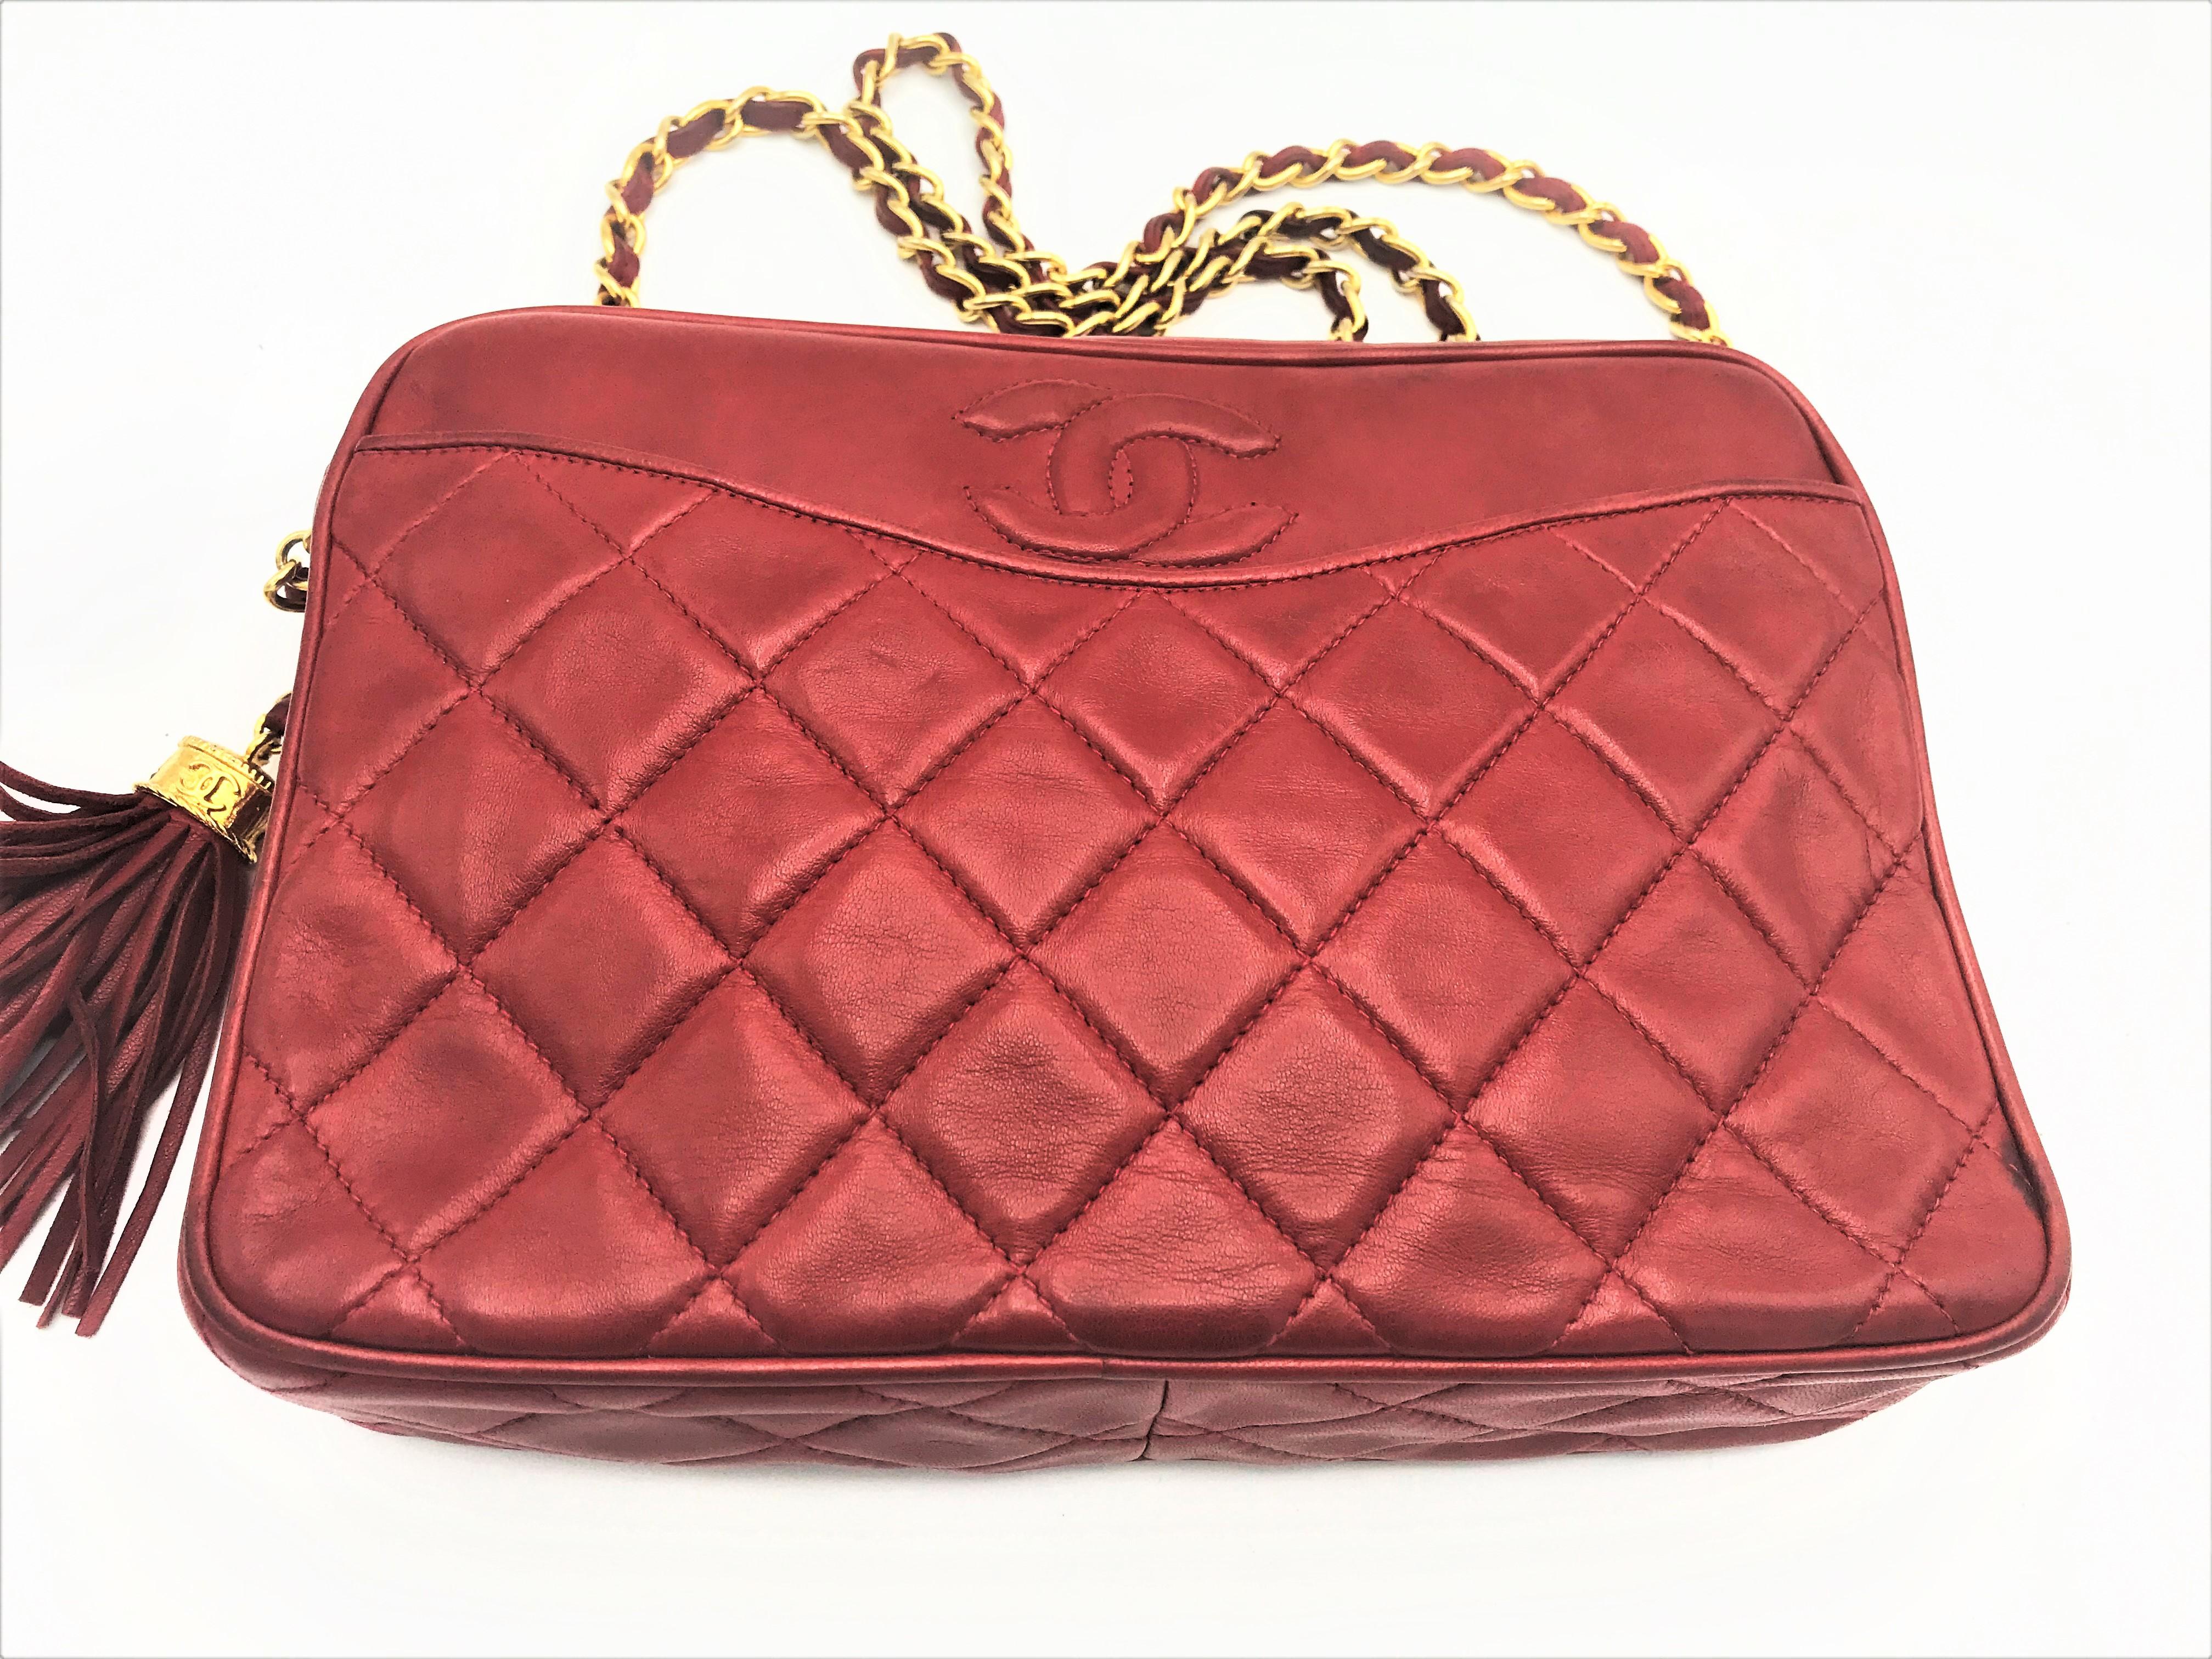 Iconic Chanel bag, lambskin in red with a very early 6 digit ID number. 0672501 and ID card. The CARTE E'AUTHENTICITE was started in 1984 with the 6-digit number!
Measurements: Hight 26 cm, Width 23 cm x Deep 6.5 cm, chain length 100 cm 
Leather